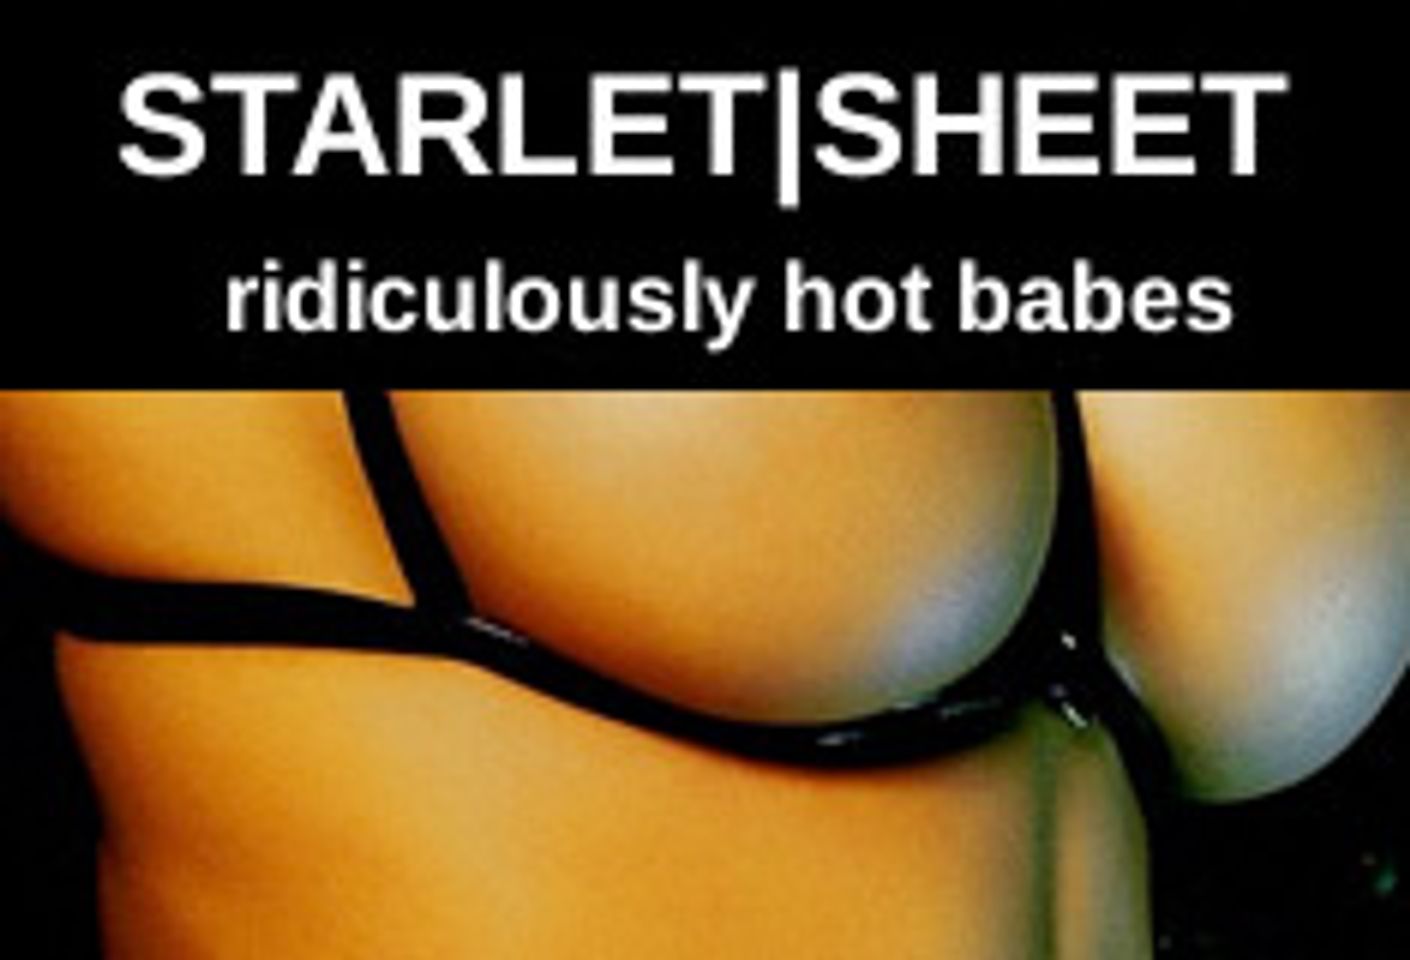 Voting Continues Until Sunday for Starlet Sheet's Debutant of the Year